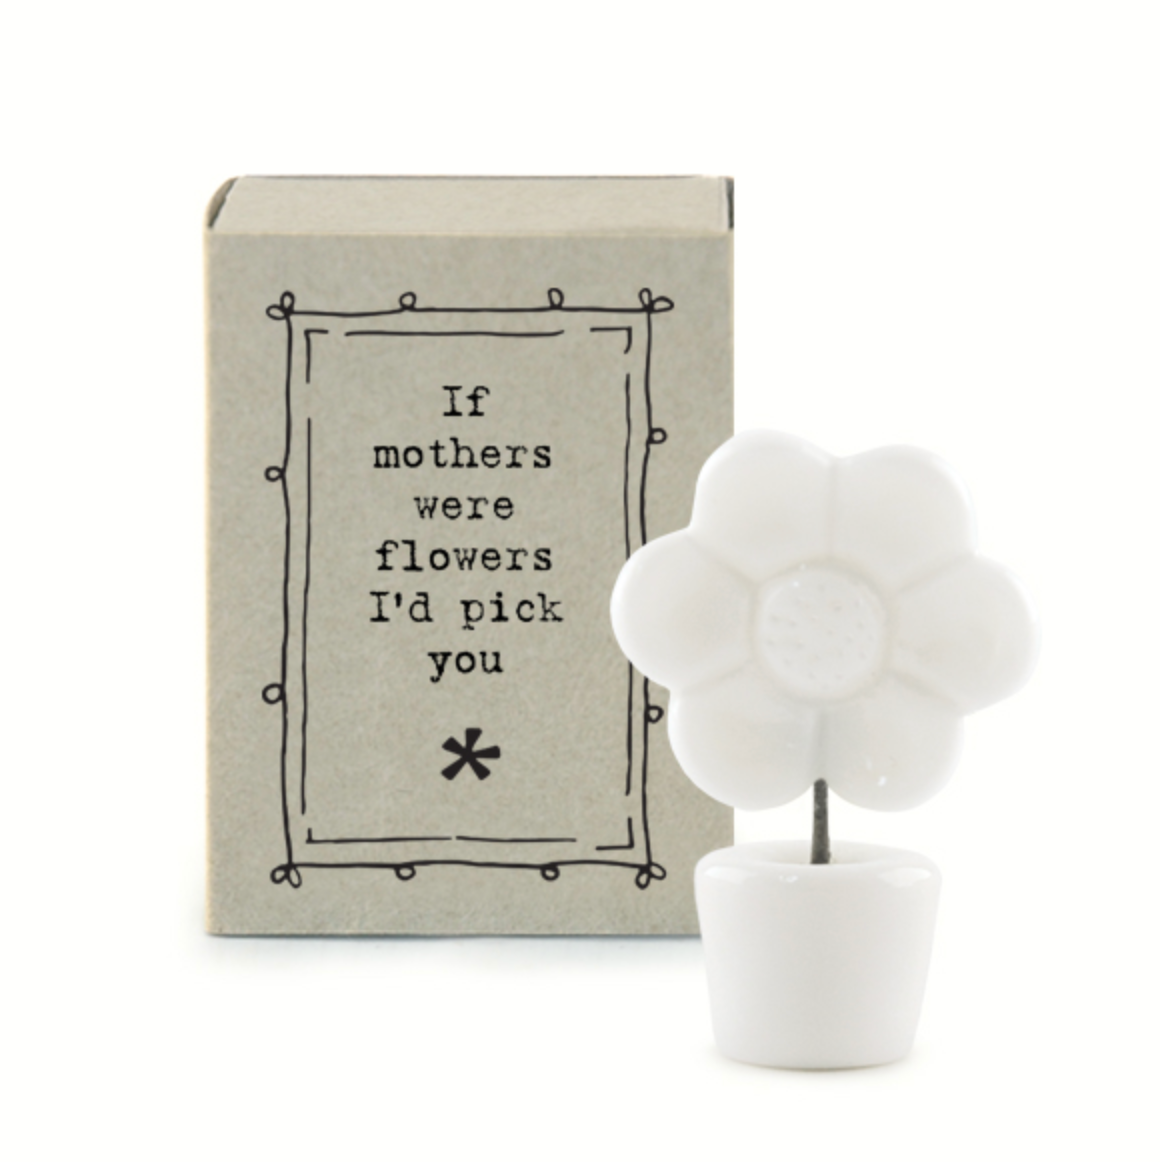 East of India Matchbox Flower - "If Mothers Were Flowers....."